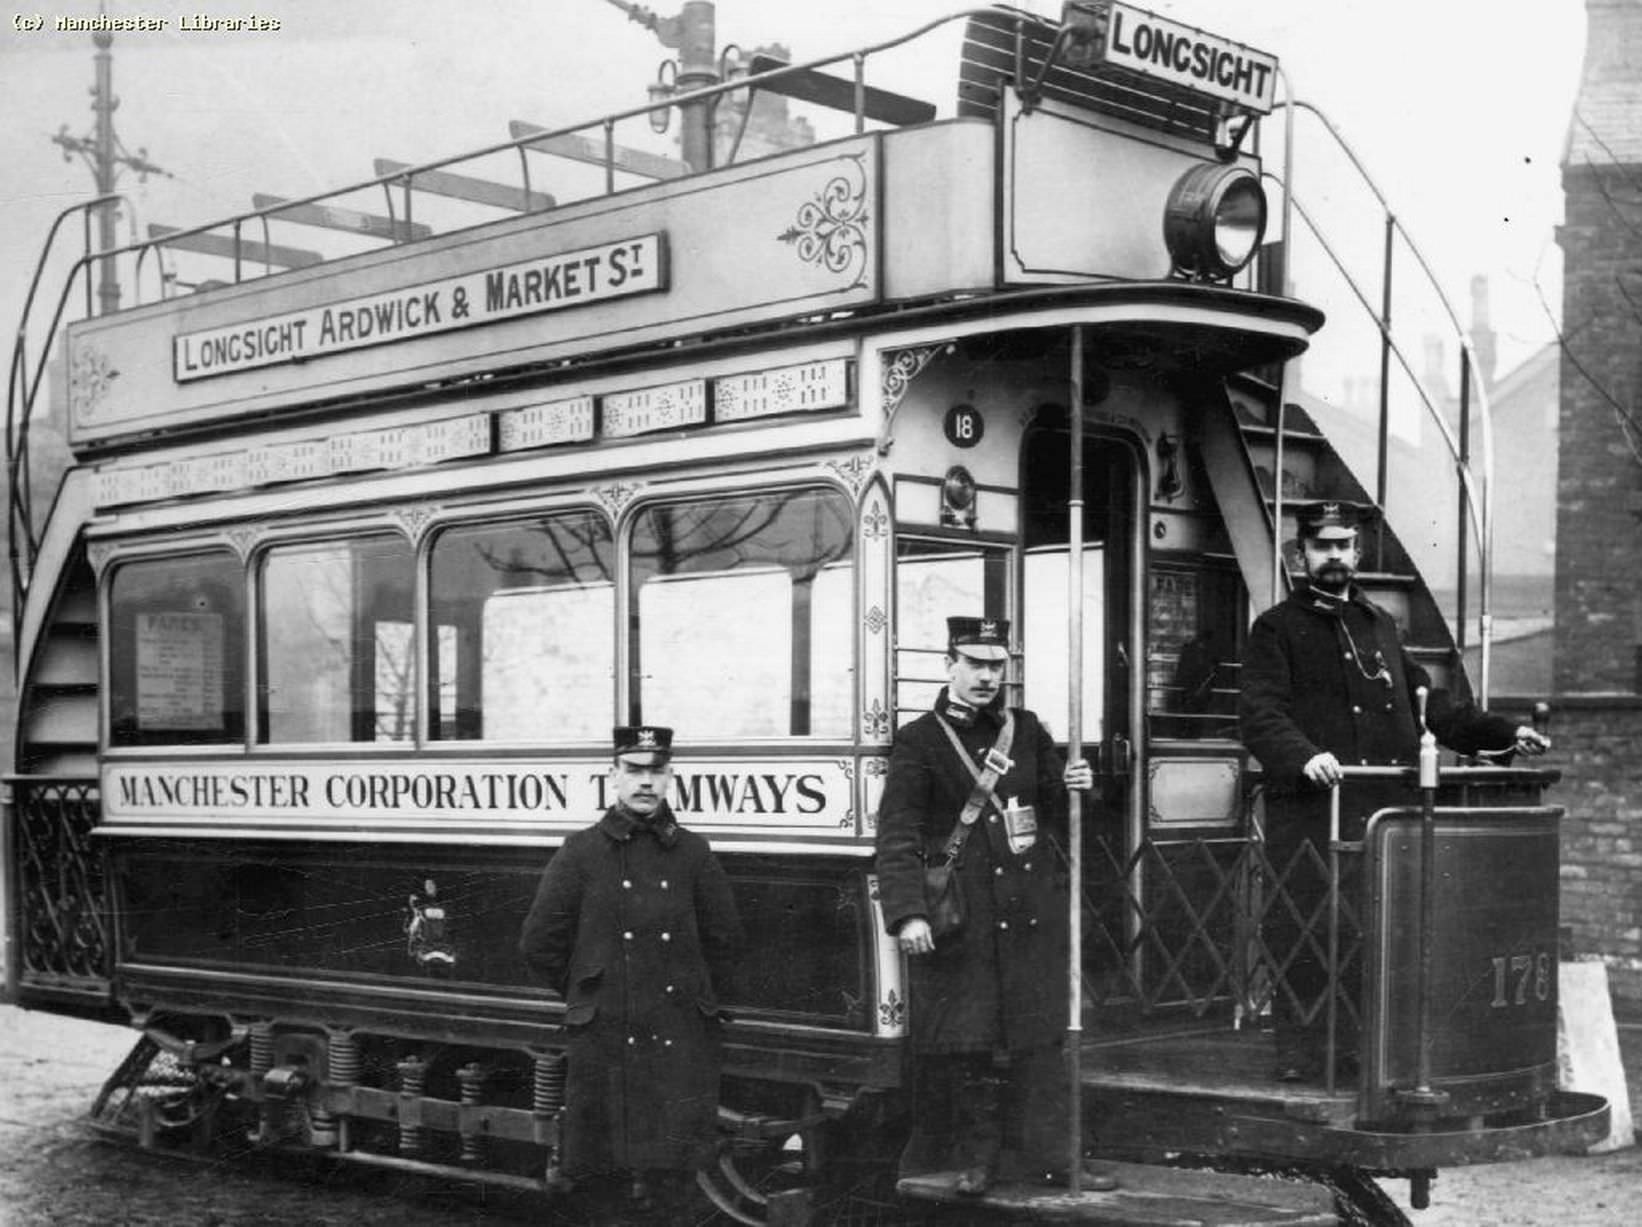 The number 178 tram